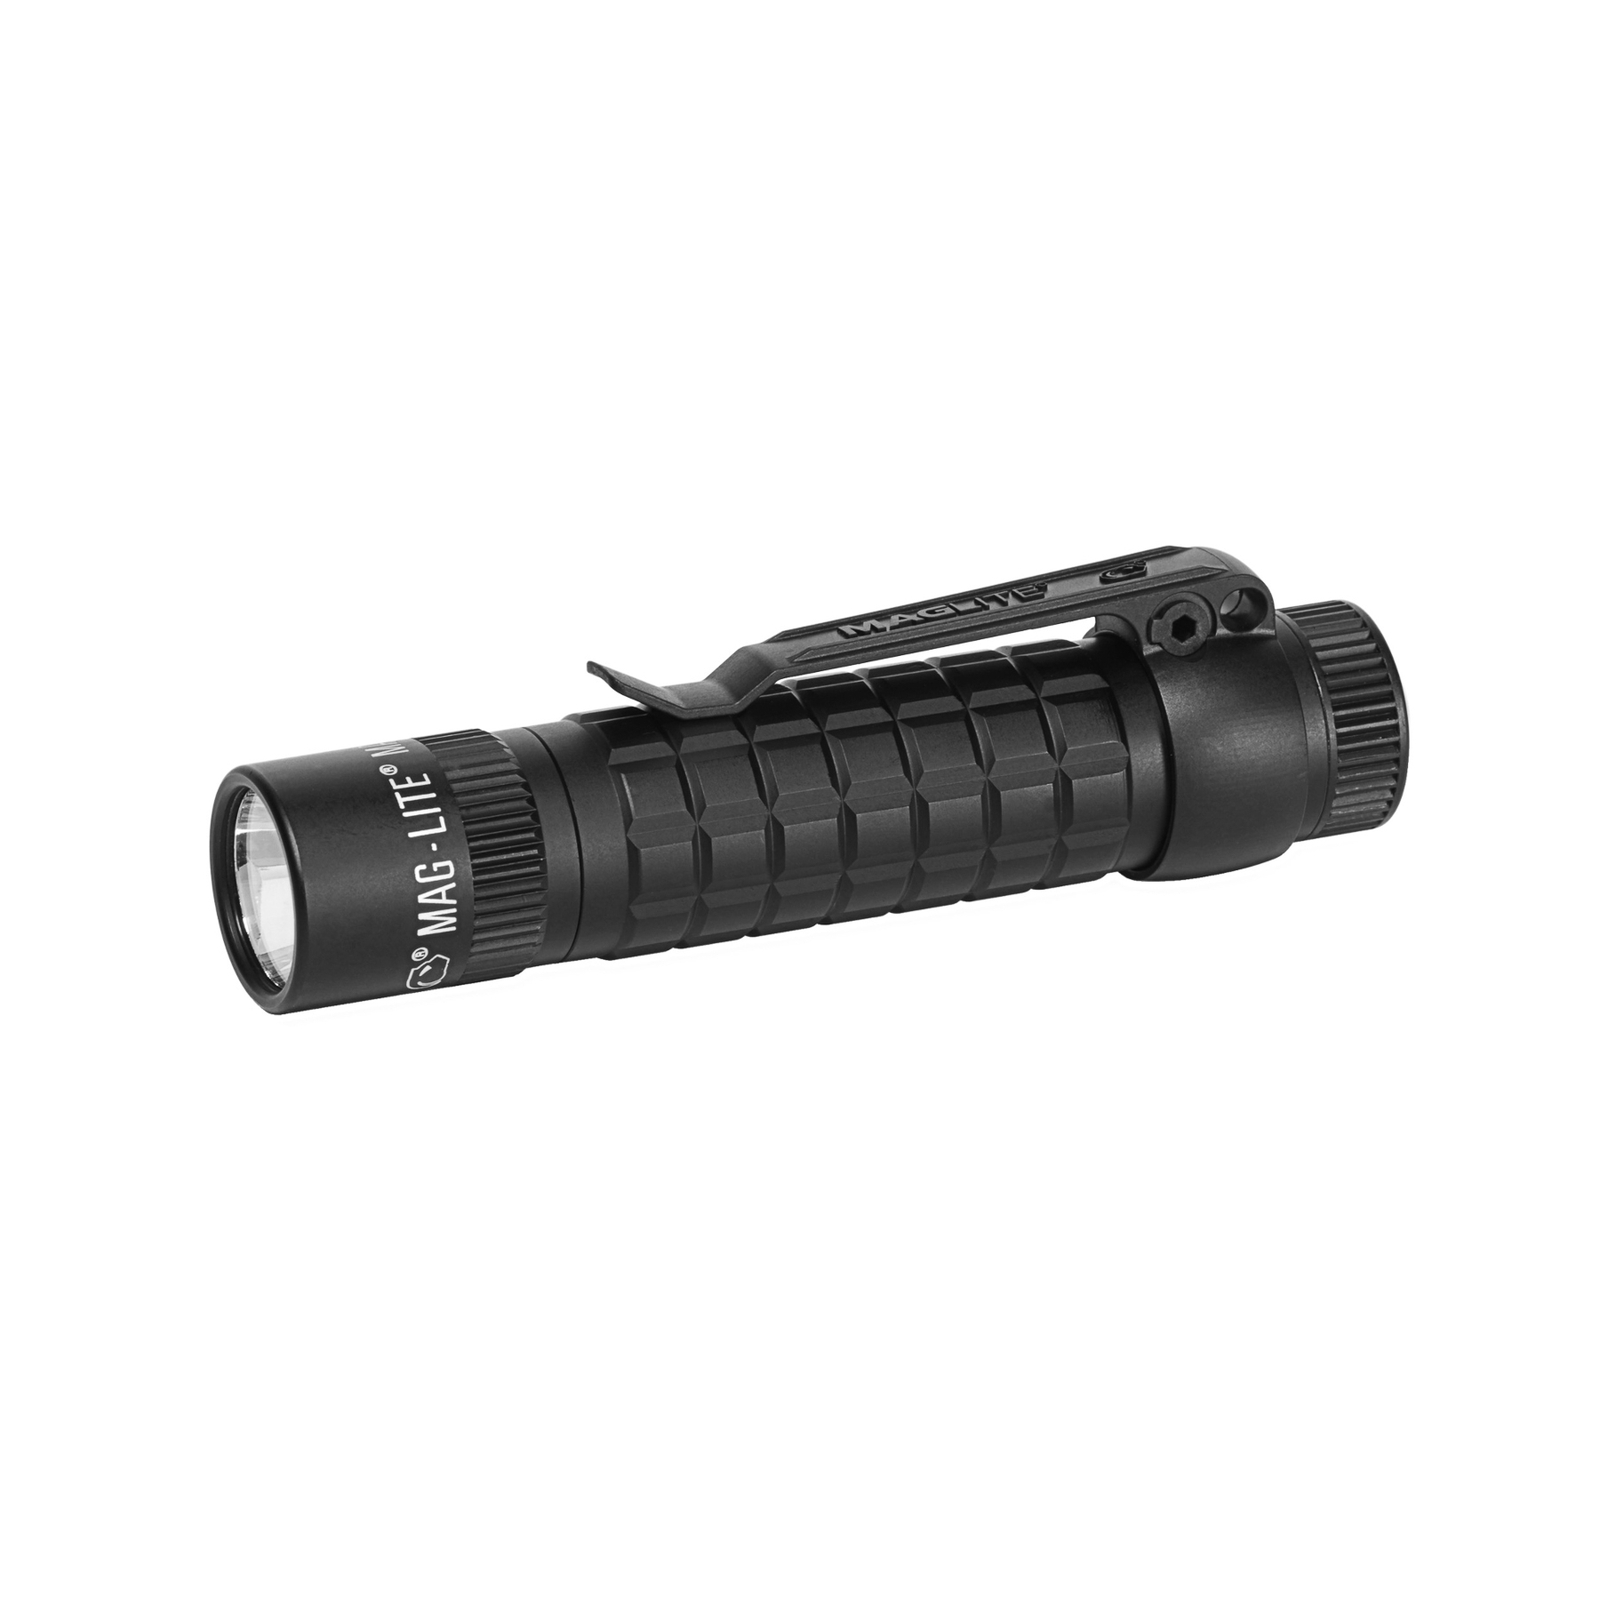 Torcia a LED Maglite Mag-Tac, 2 Cell CR123, nera